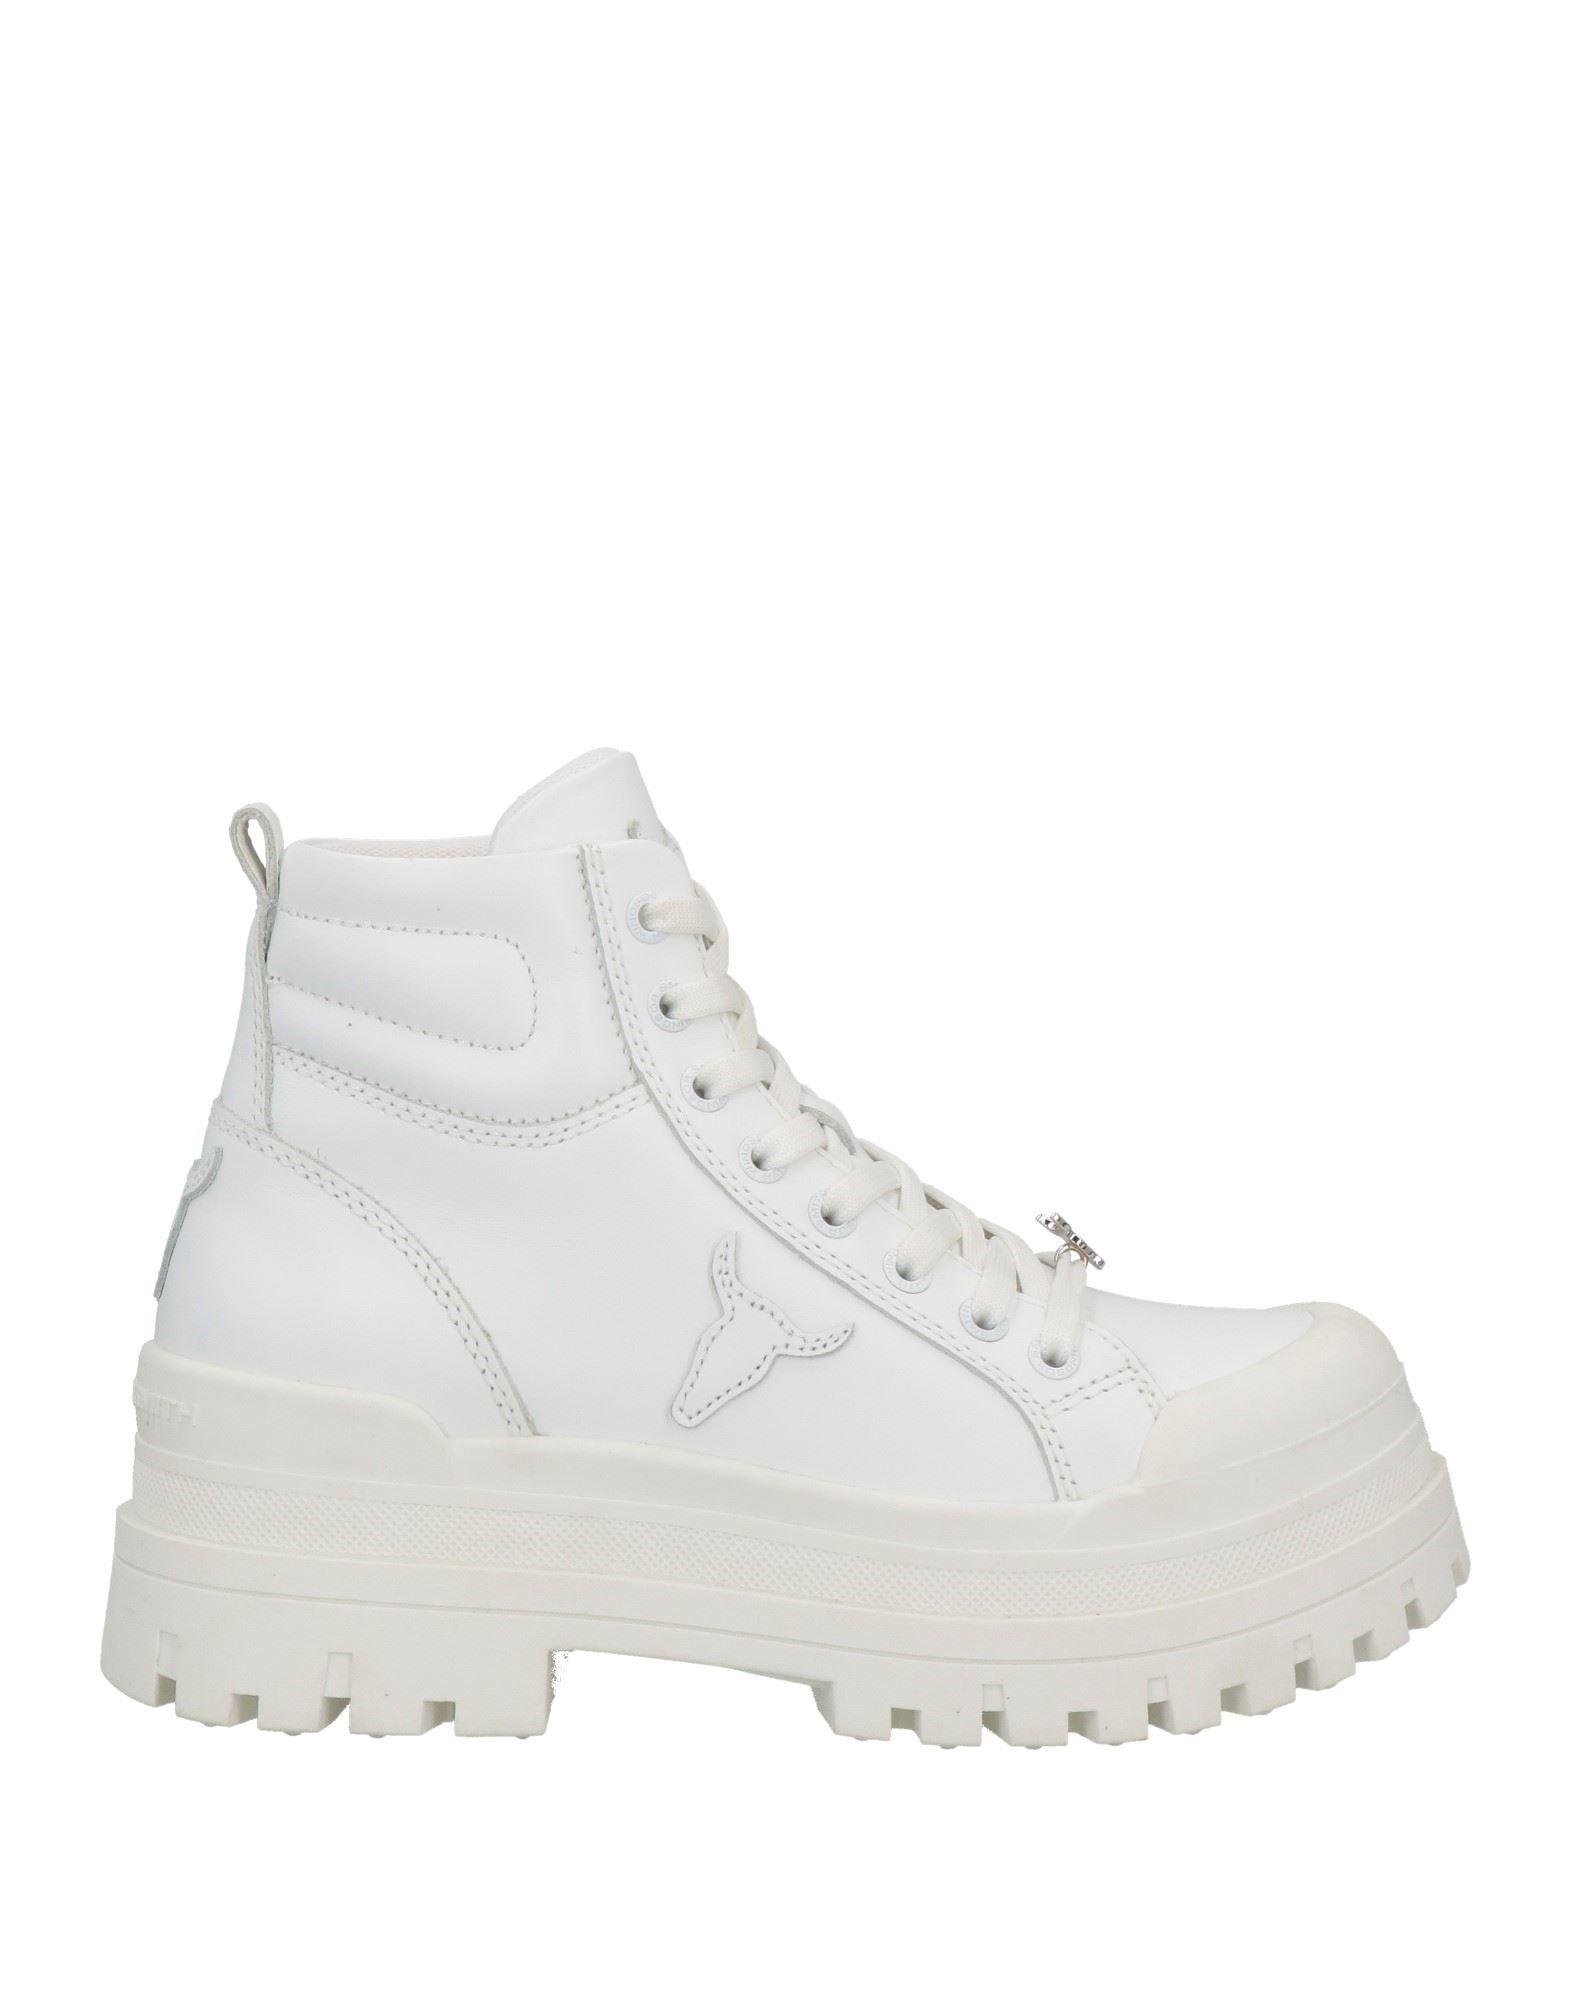 Windsor Smith Ankle Boots in White | Lyst